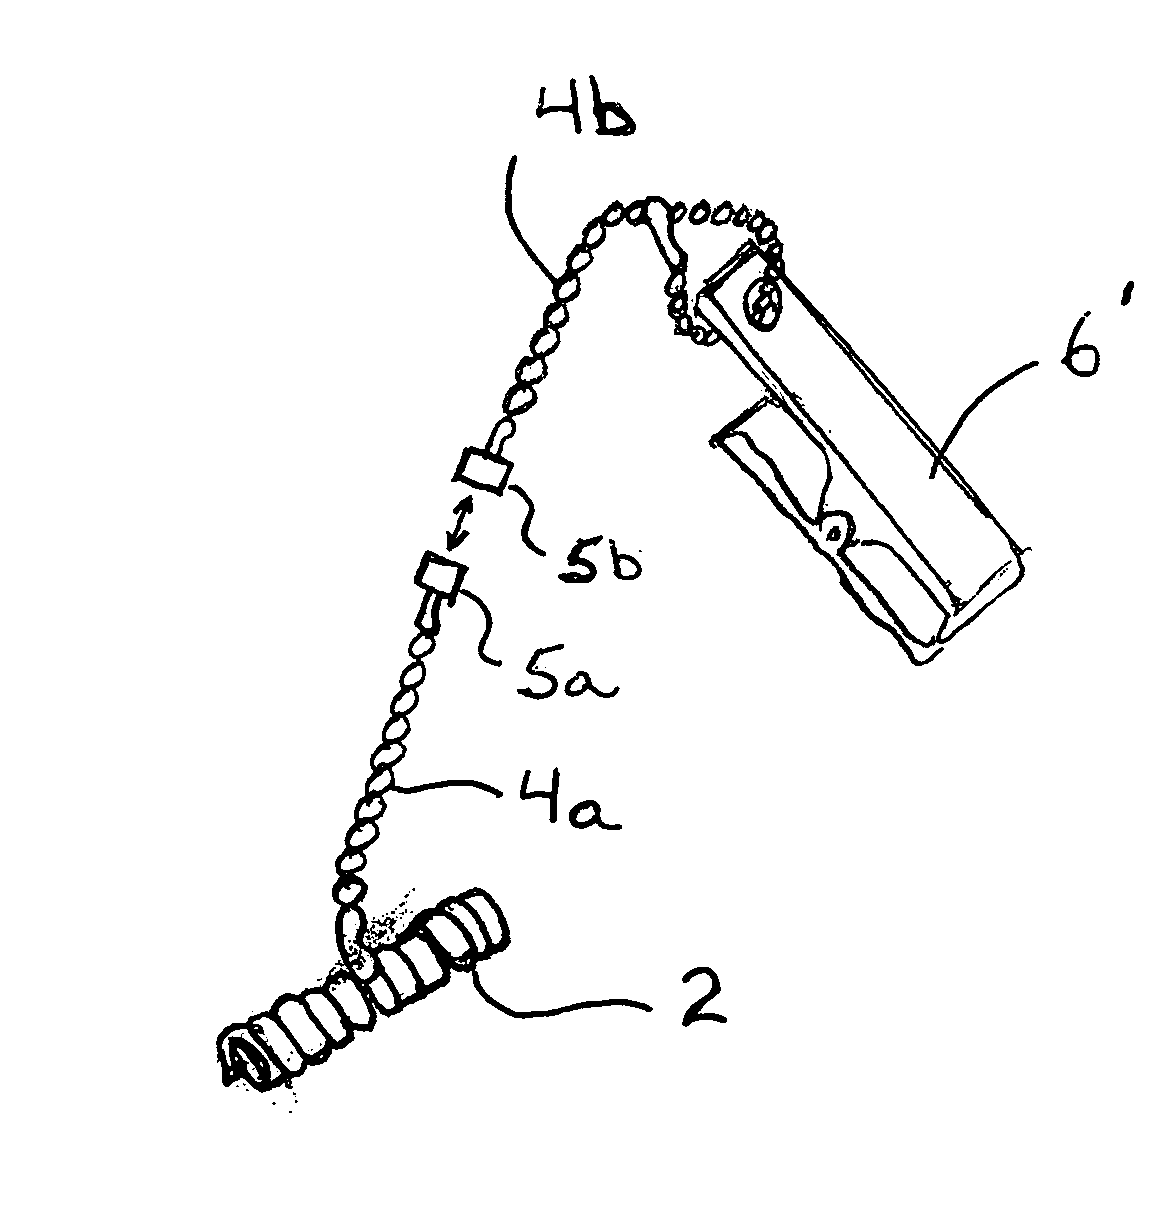 Magnetic retaining device